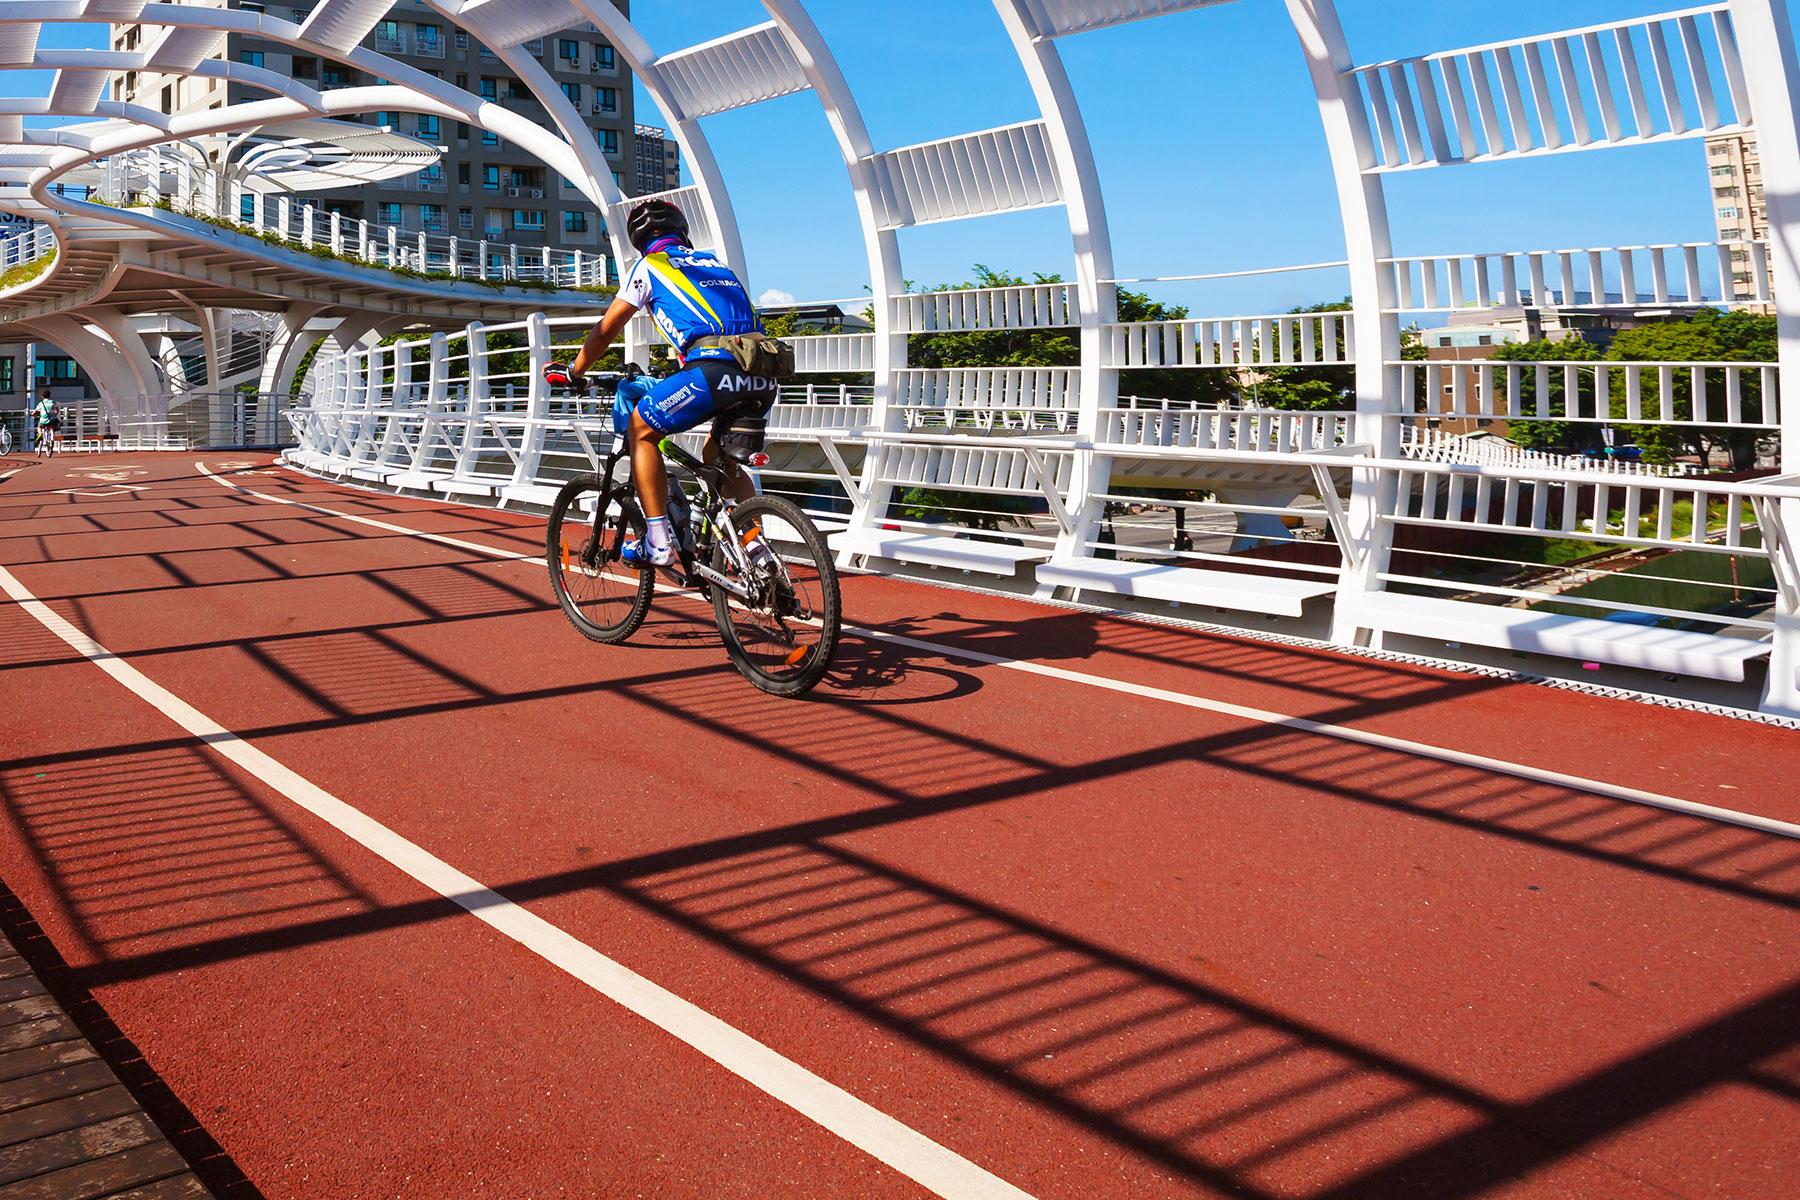 The World's 12 Most Bike-Friendly Cities – Fodors Travel Guide